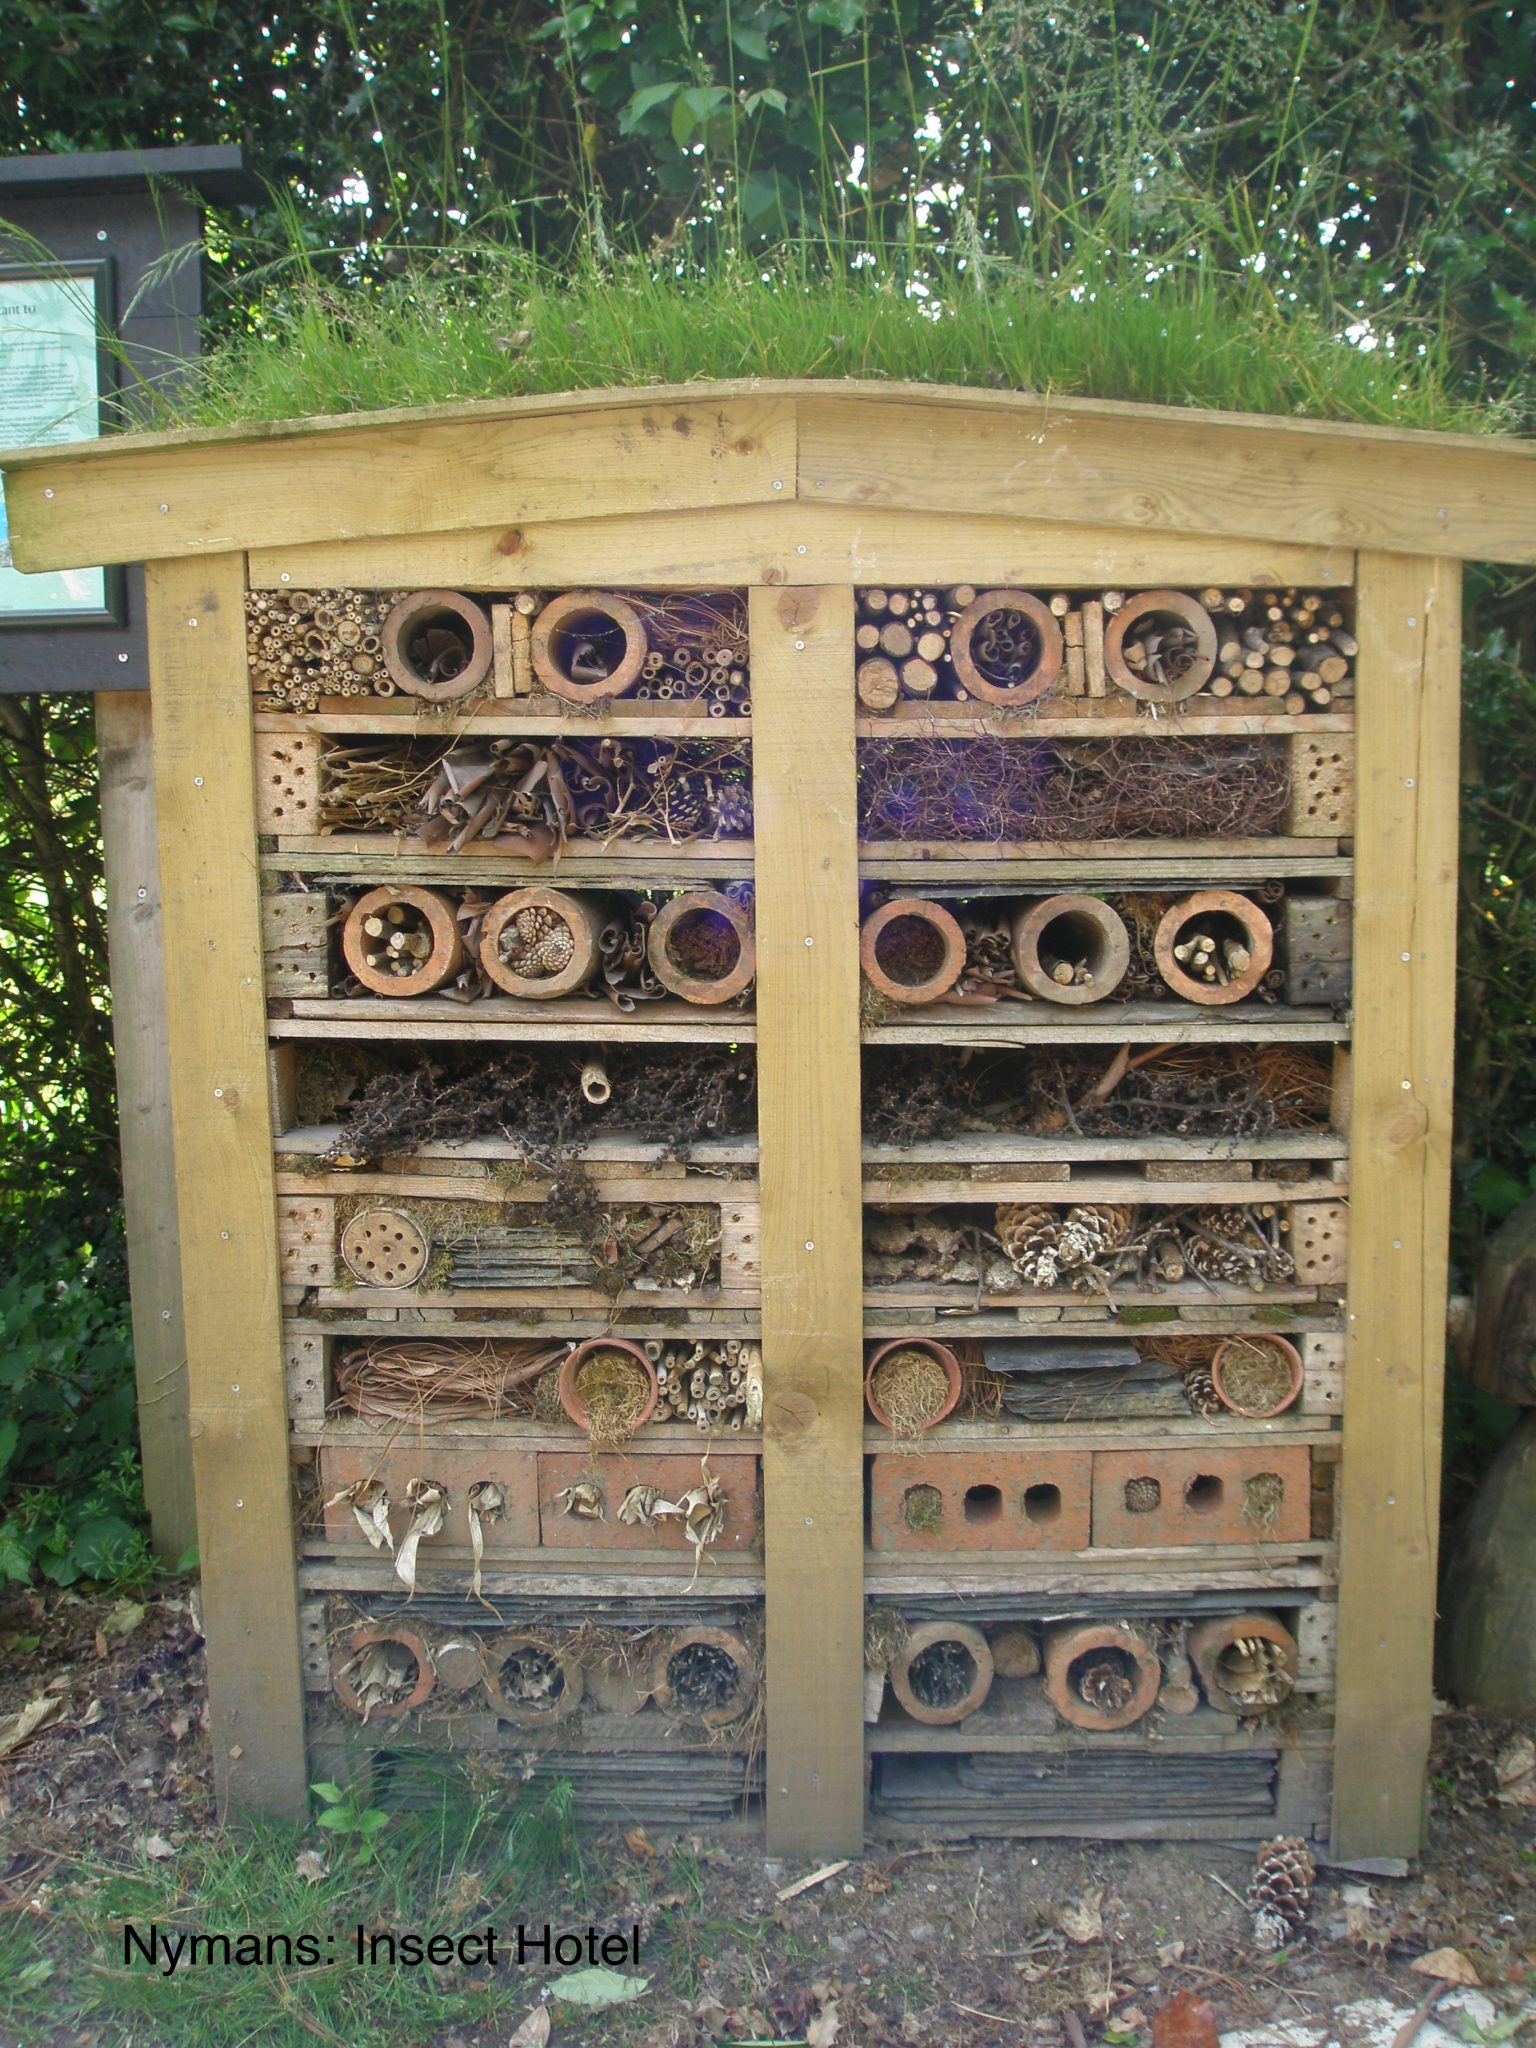 The Insect Hotel, at Nymans